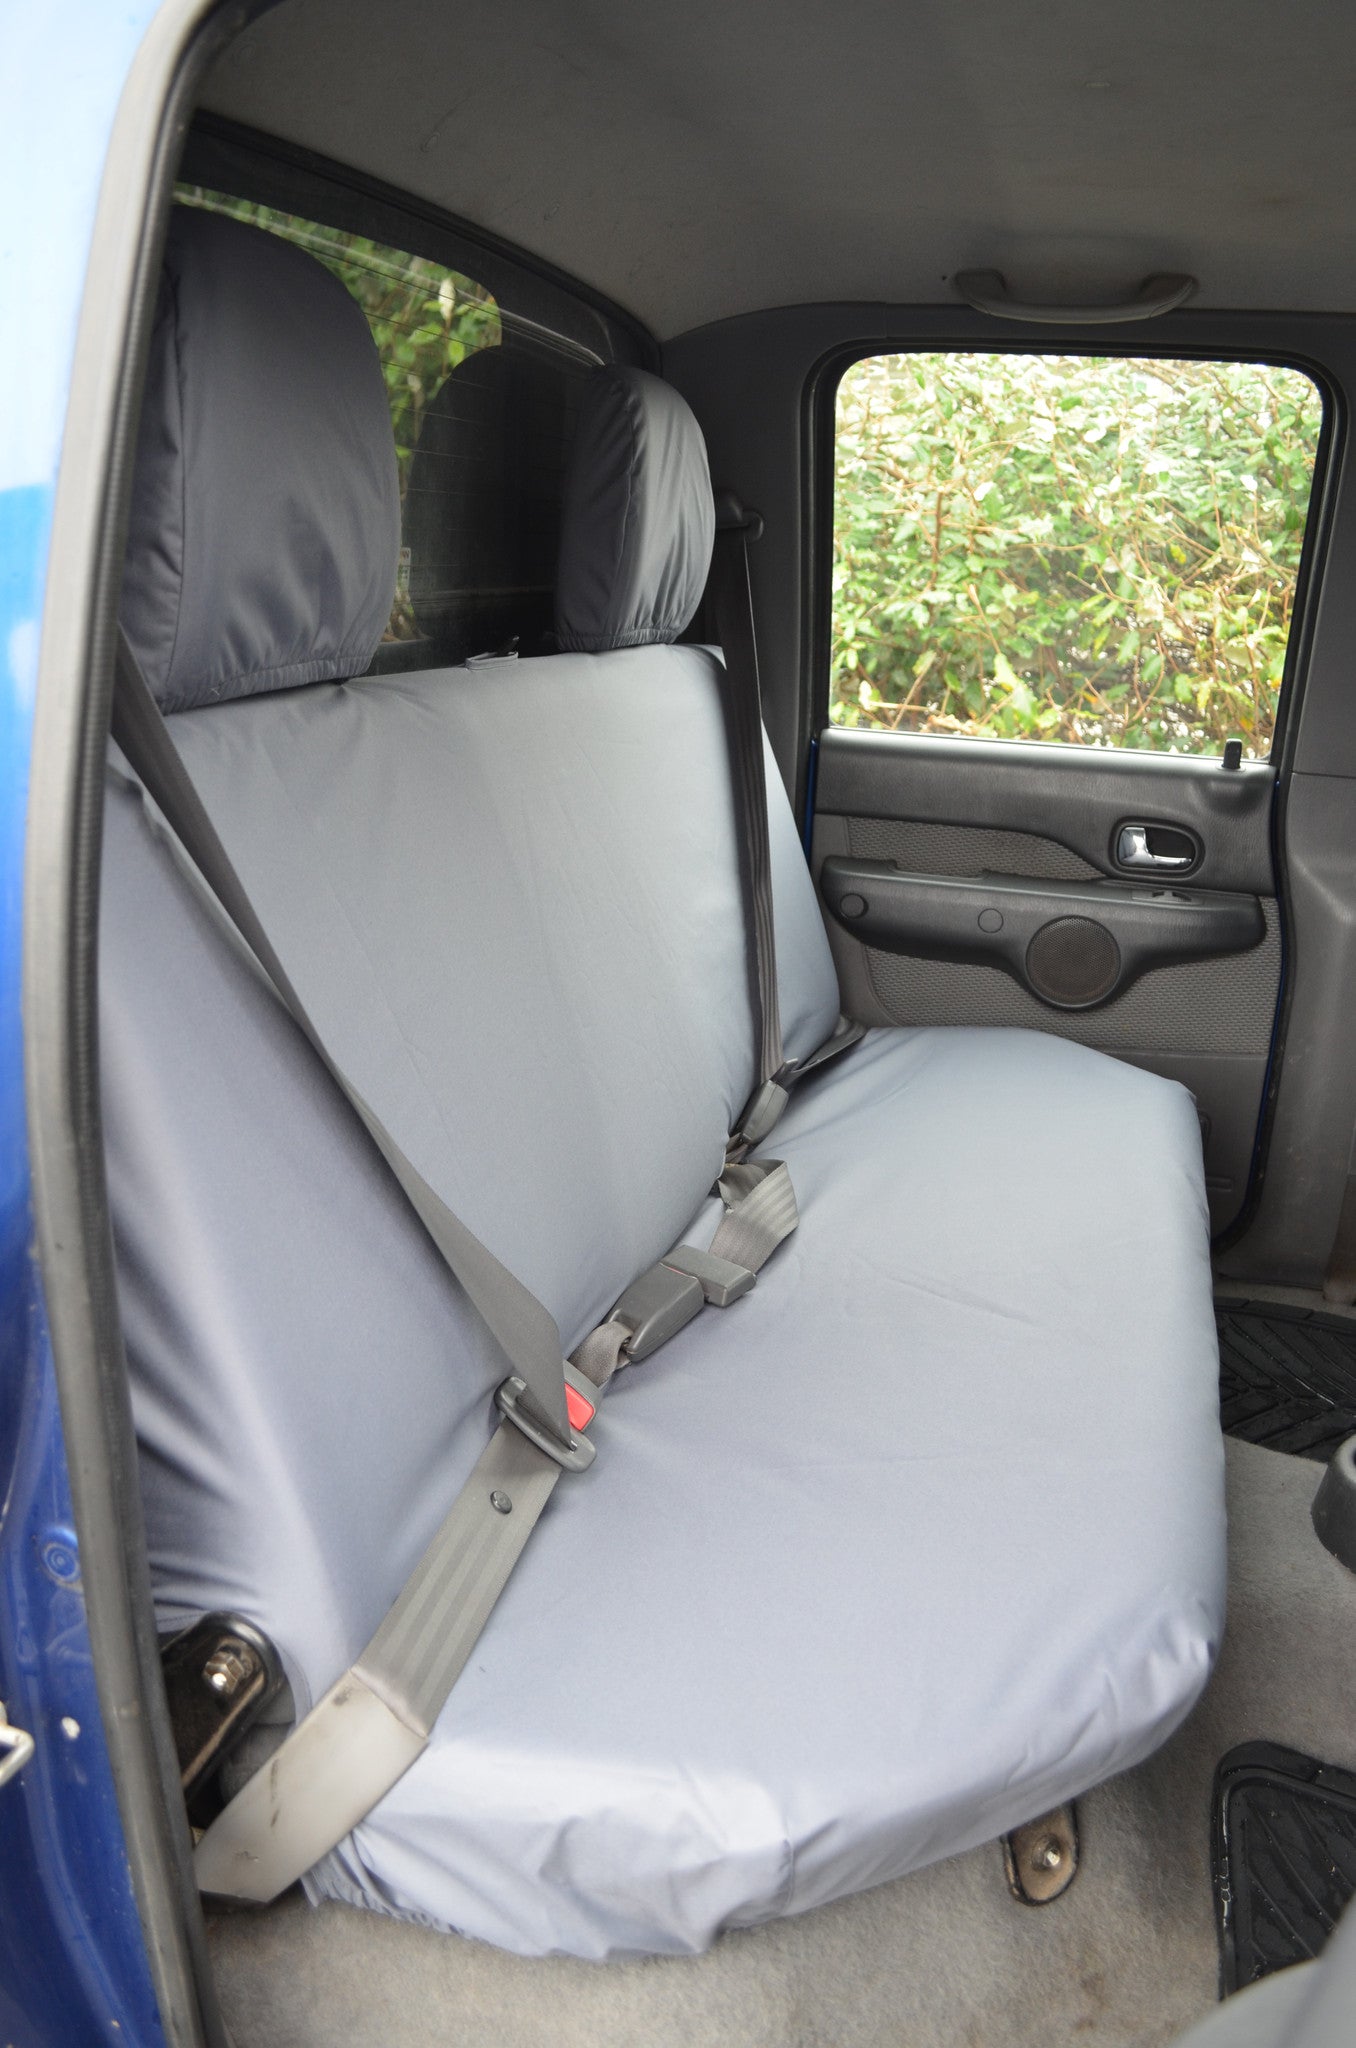 Ford Ranger 1999 to 2006 Seat Covers Rear Seat Cover / Grey Turtle Covers Ltd